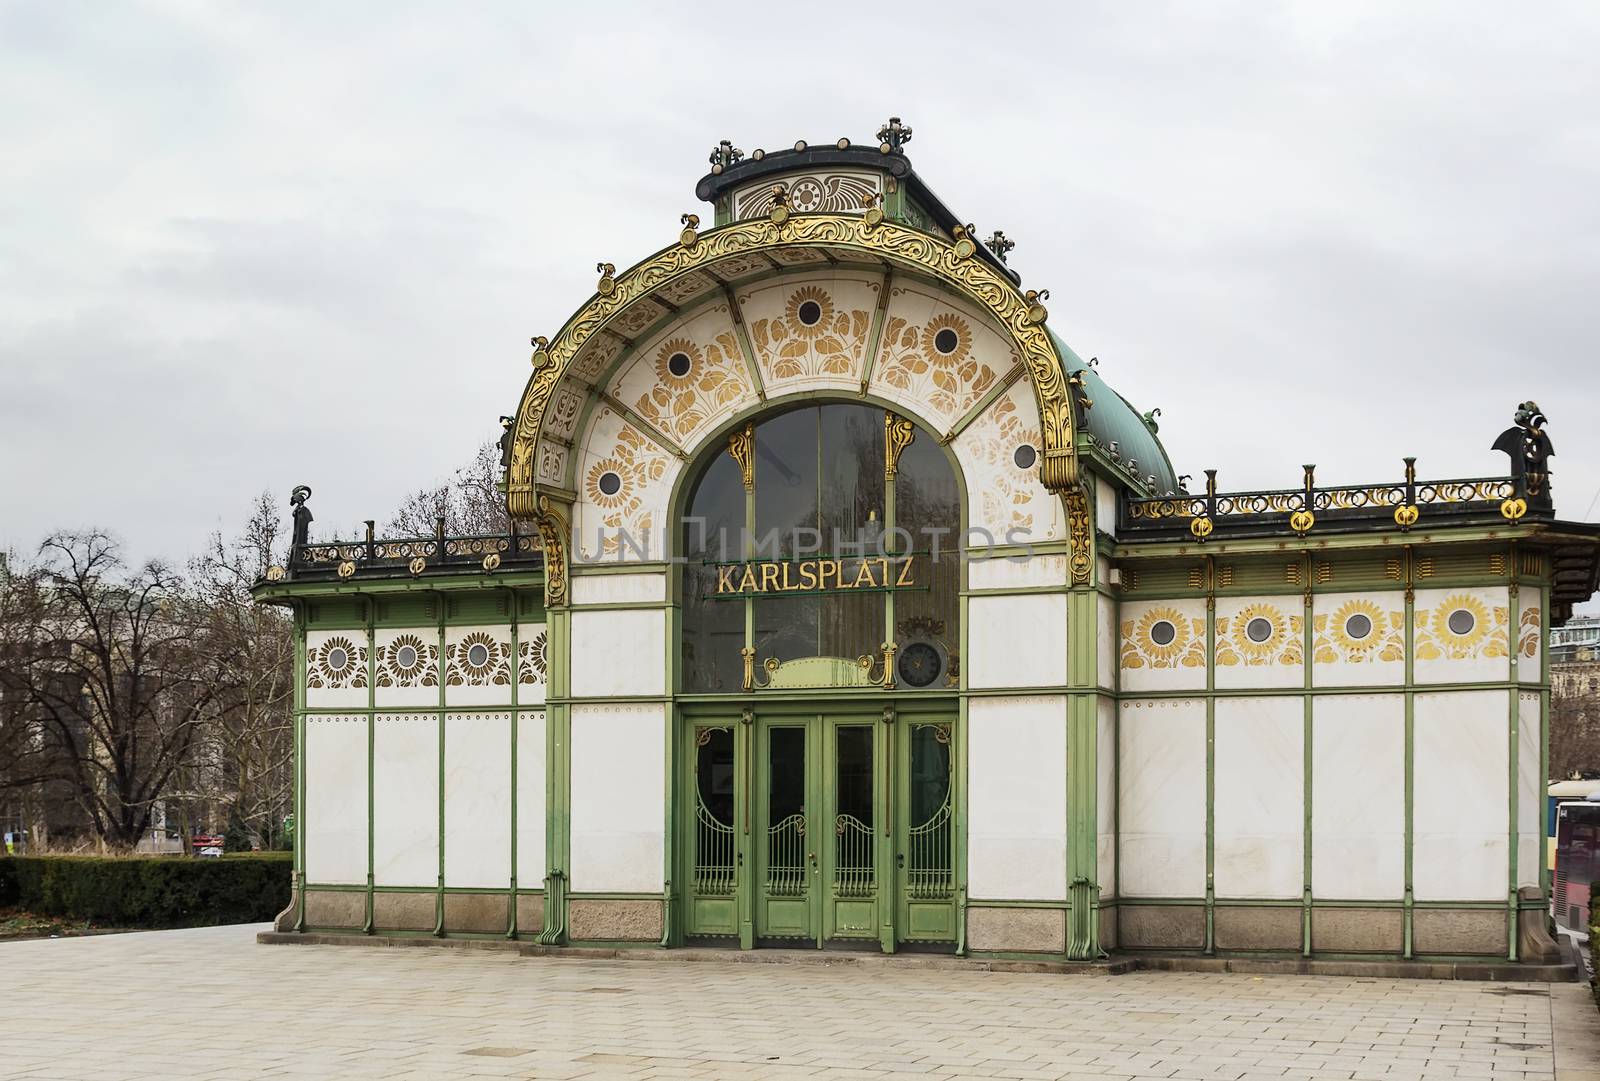 The Art Nouveau pavilion on Karlsplatz was erected by Otto Wagner in 1898 in the course of Stadtbahn construction.